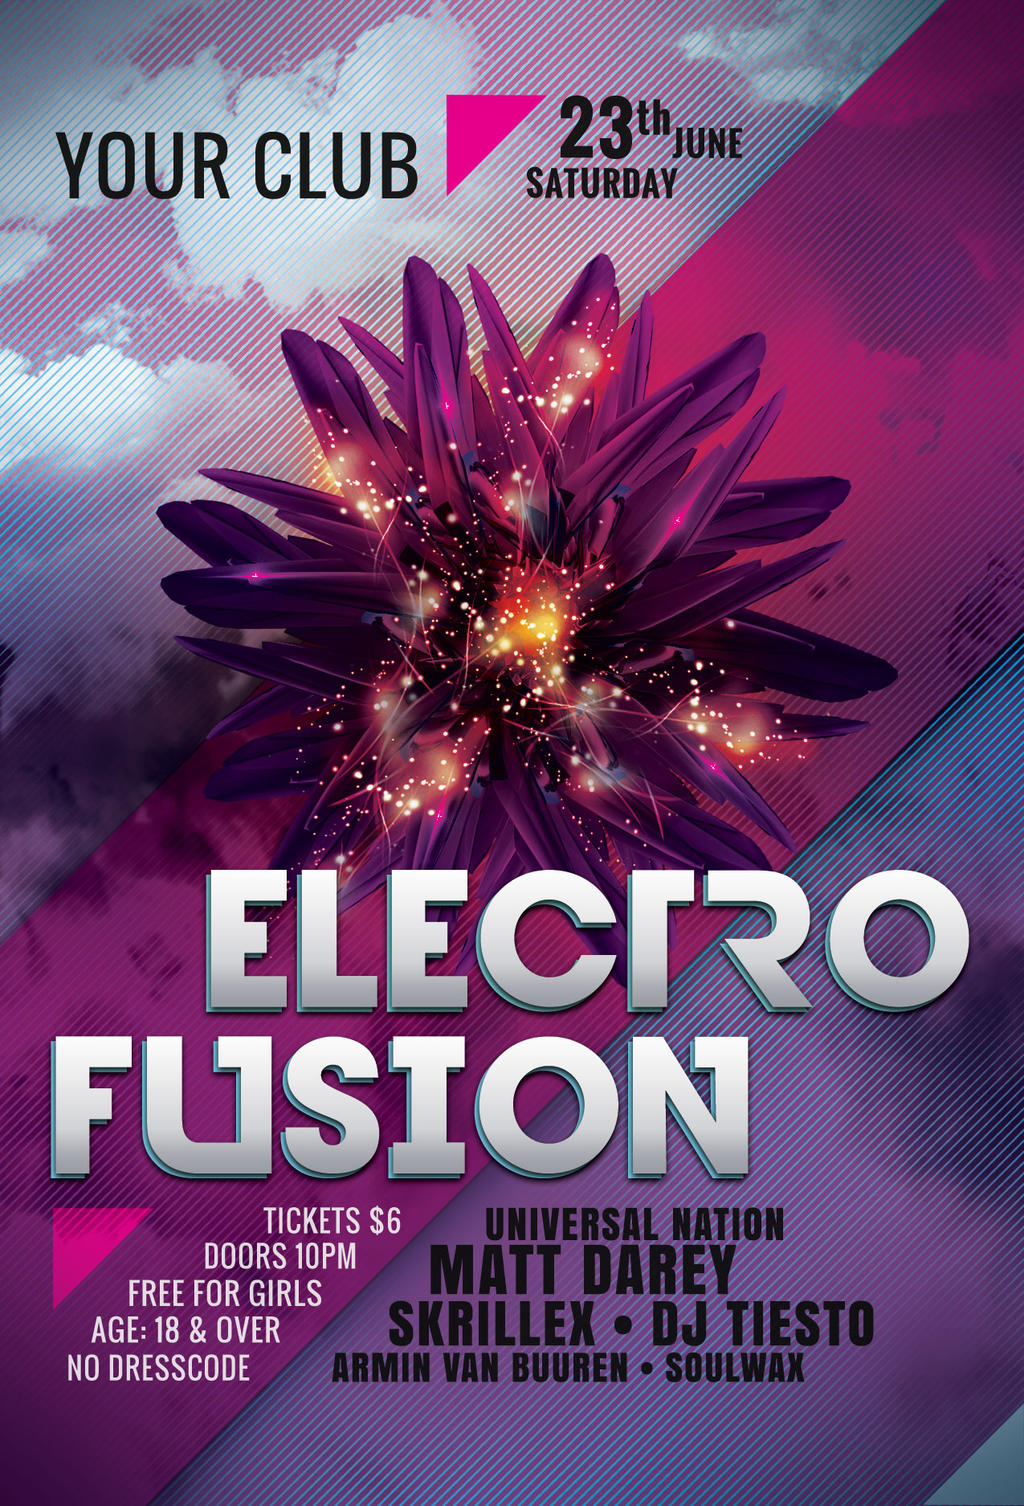 Electro Fusion Flyer Template by styleWish on DeviantArt